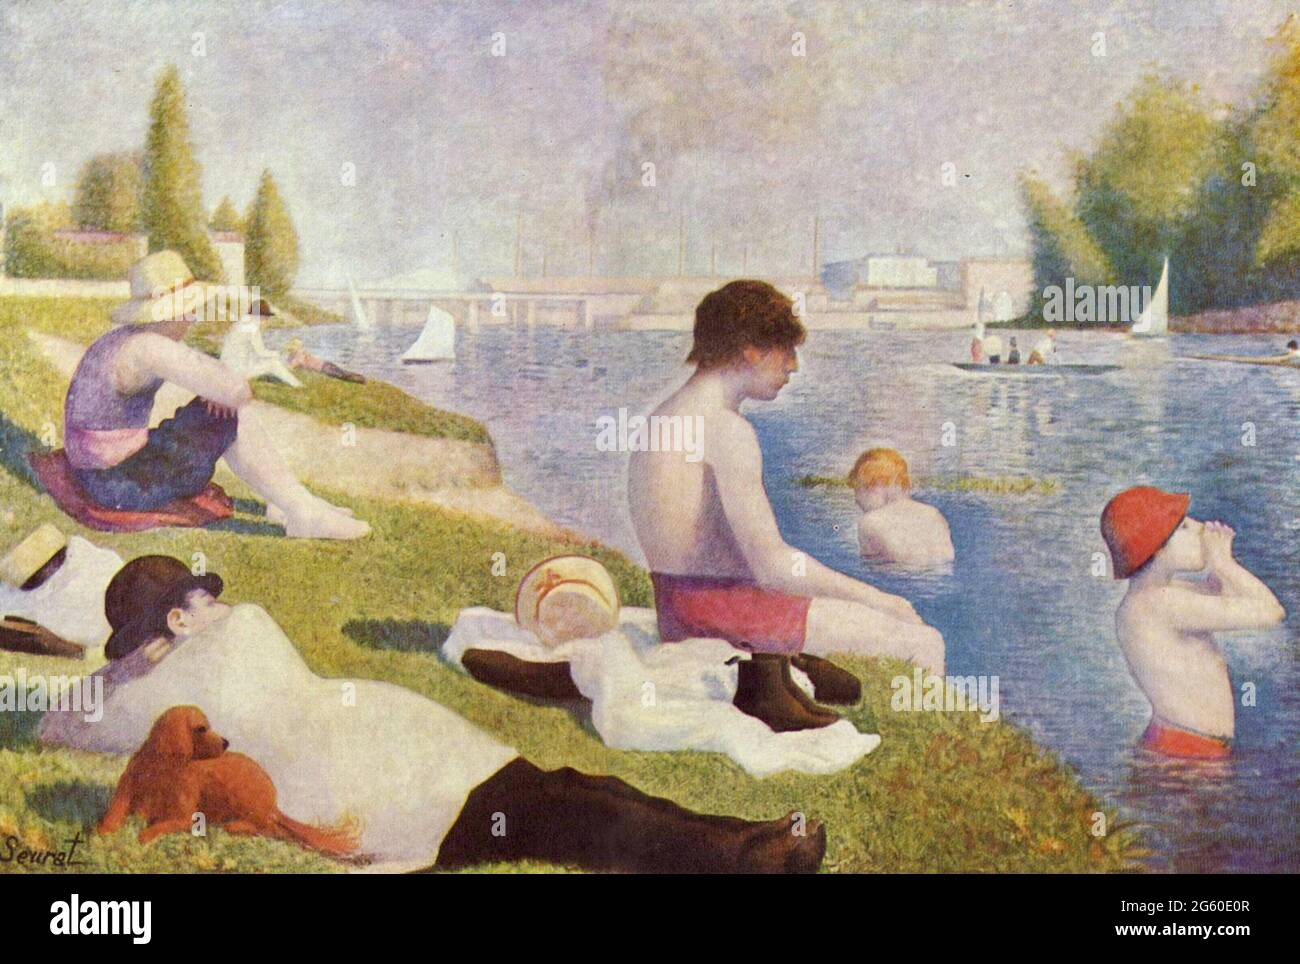 Georges Seurat artwork - The Bathers Stock Photo